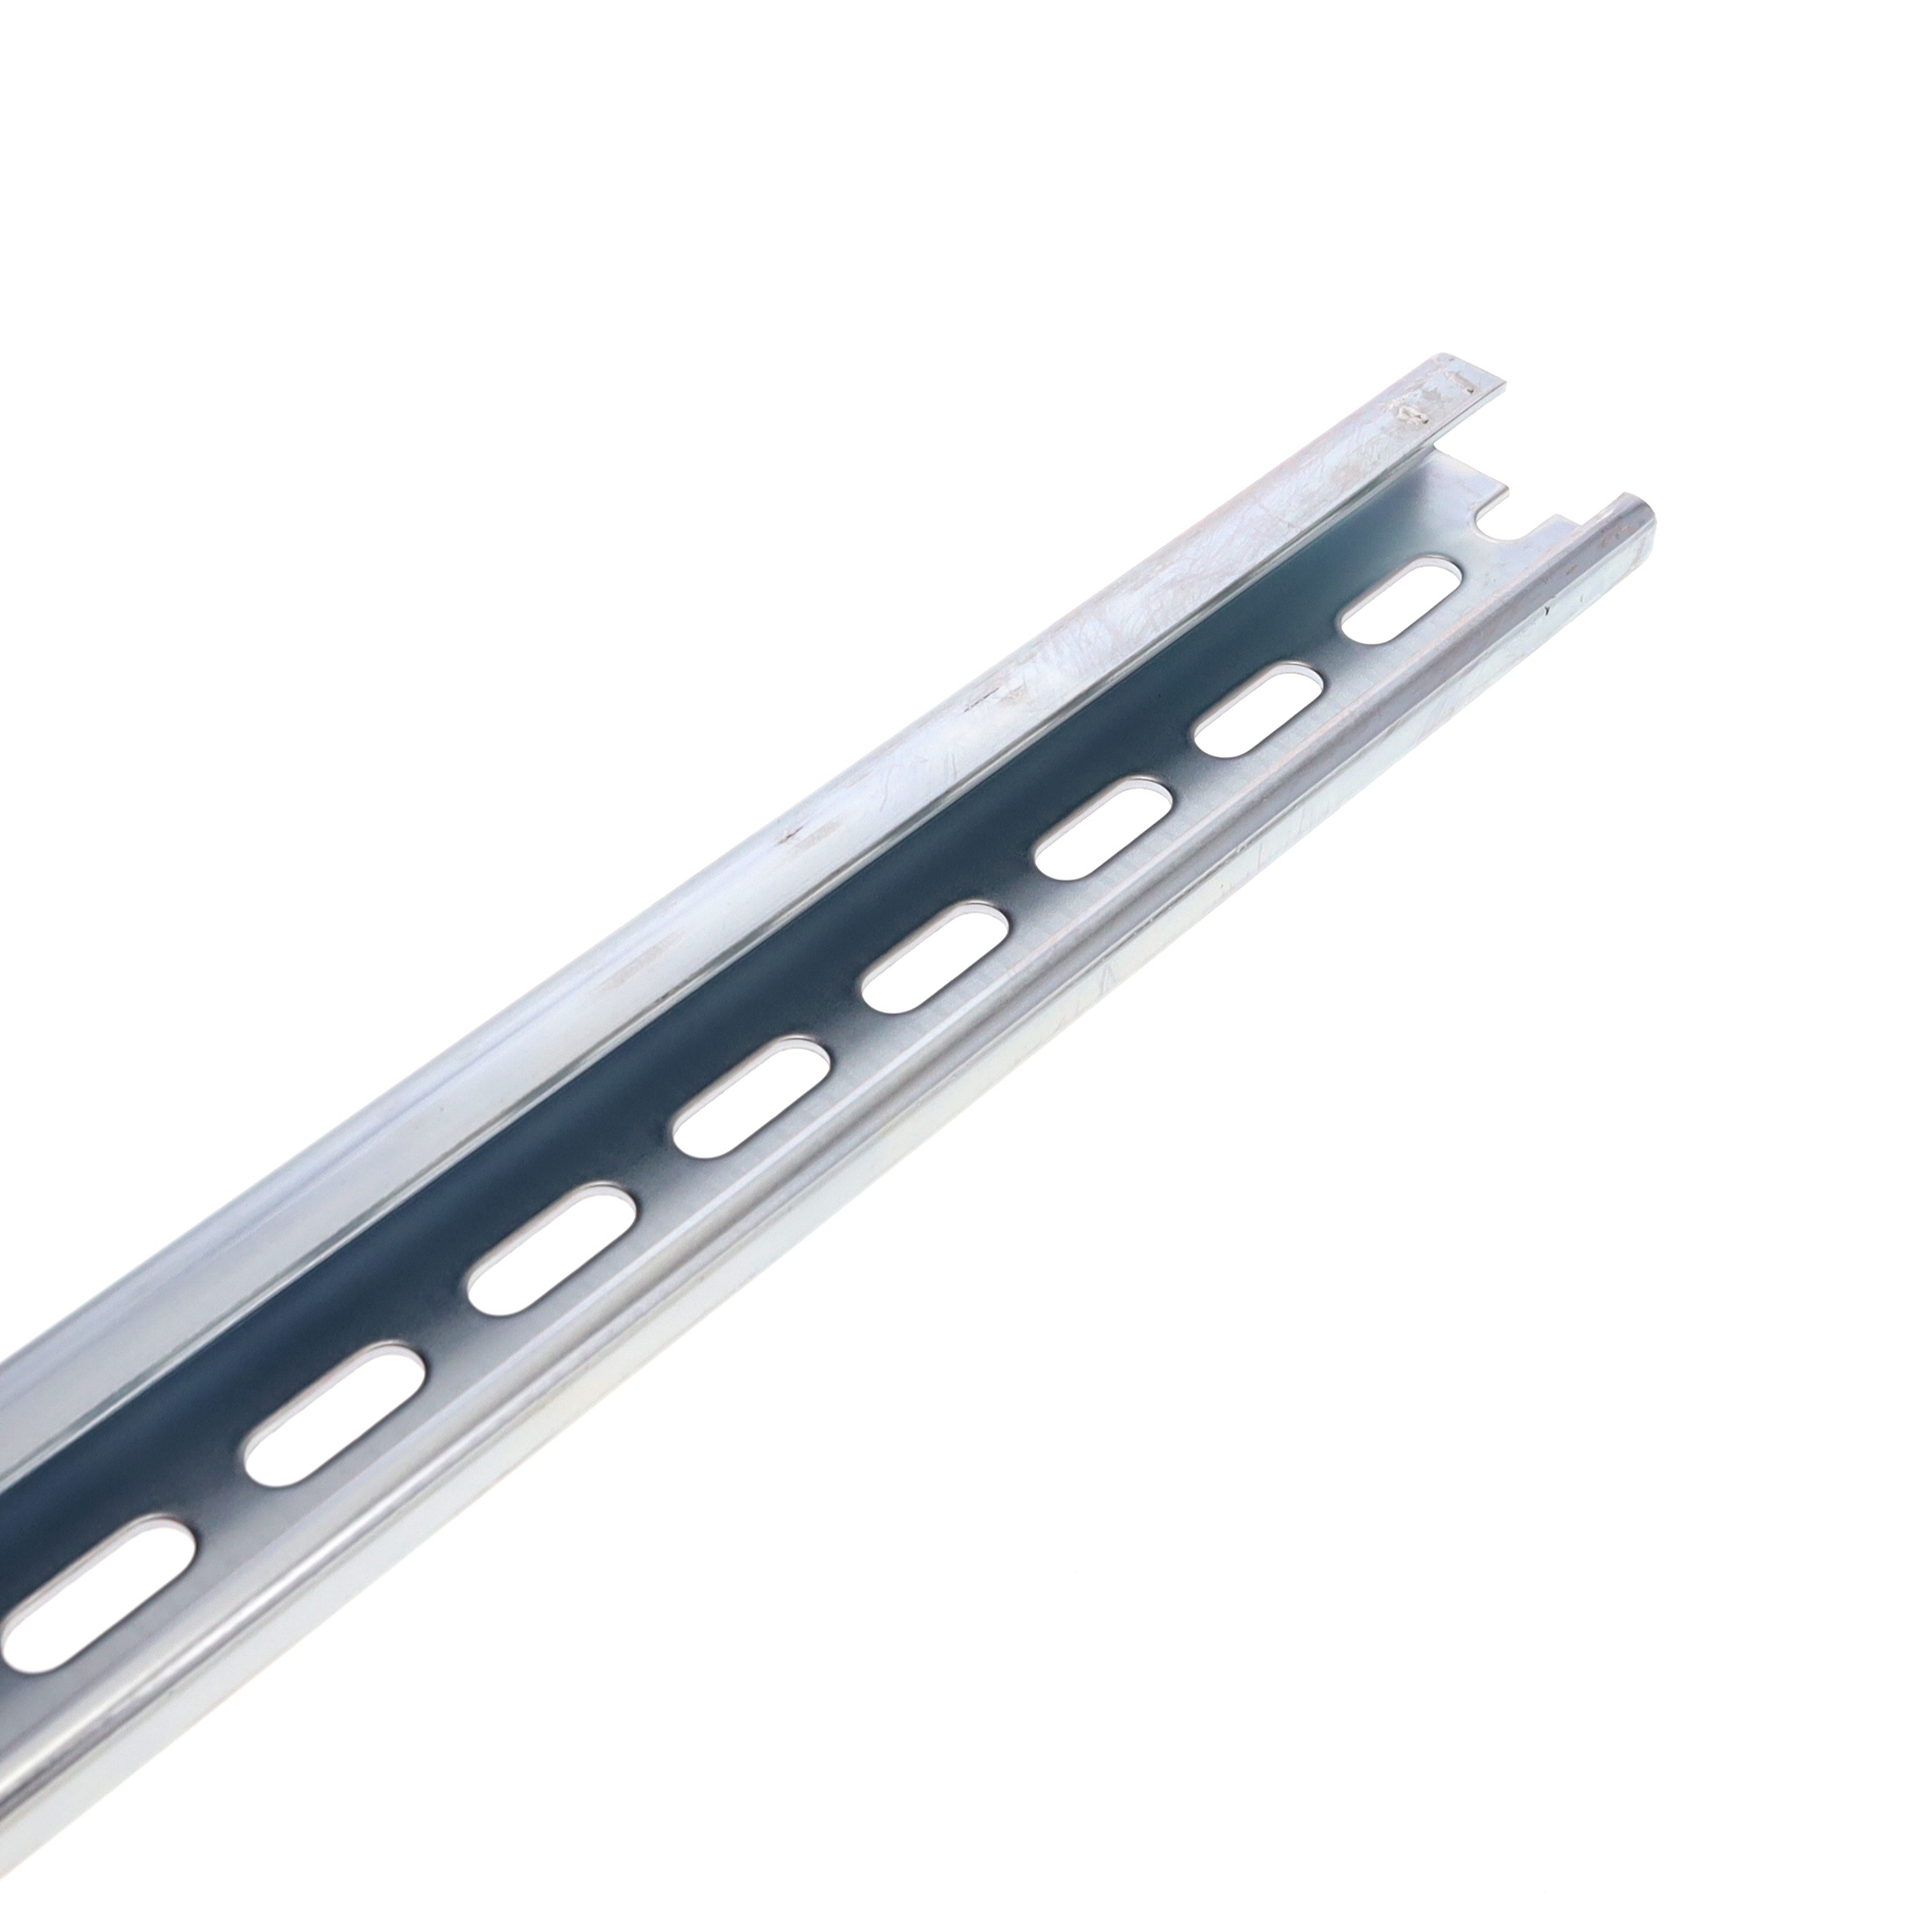 【2511160】TS32 DIN RAIL STEEL PERFORATED 2